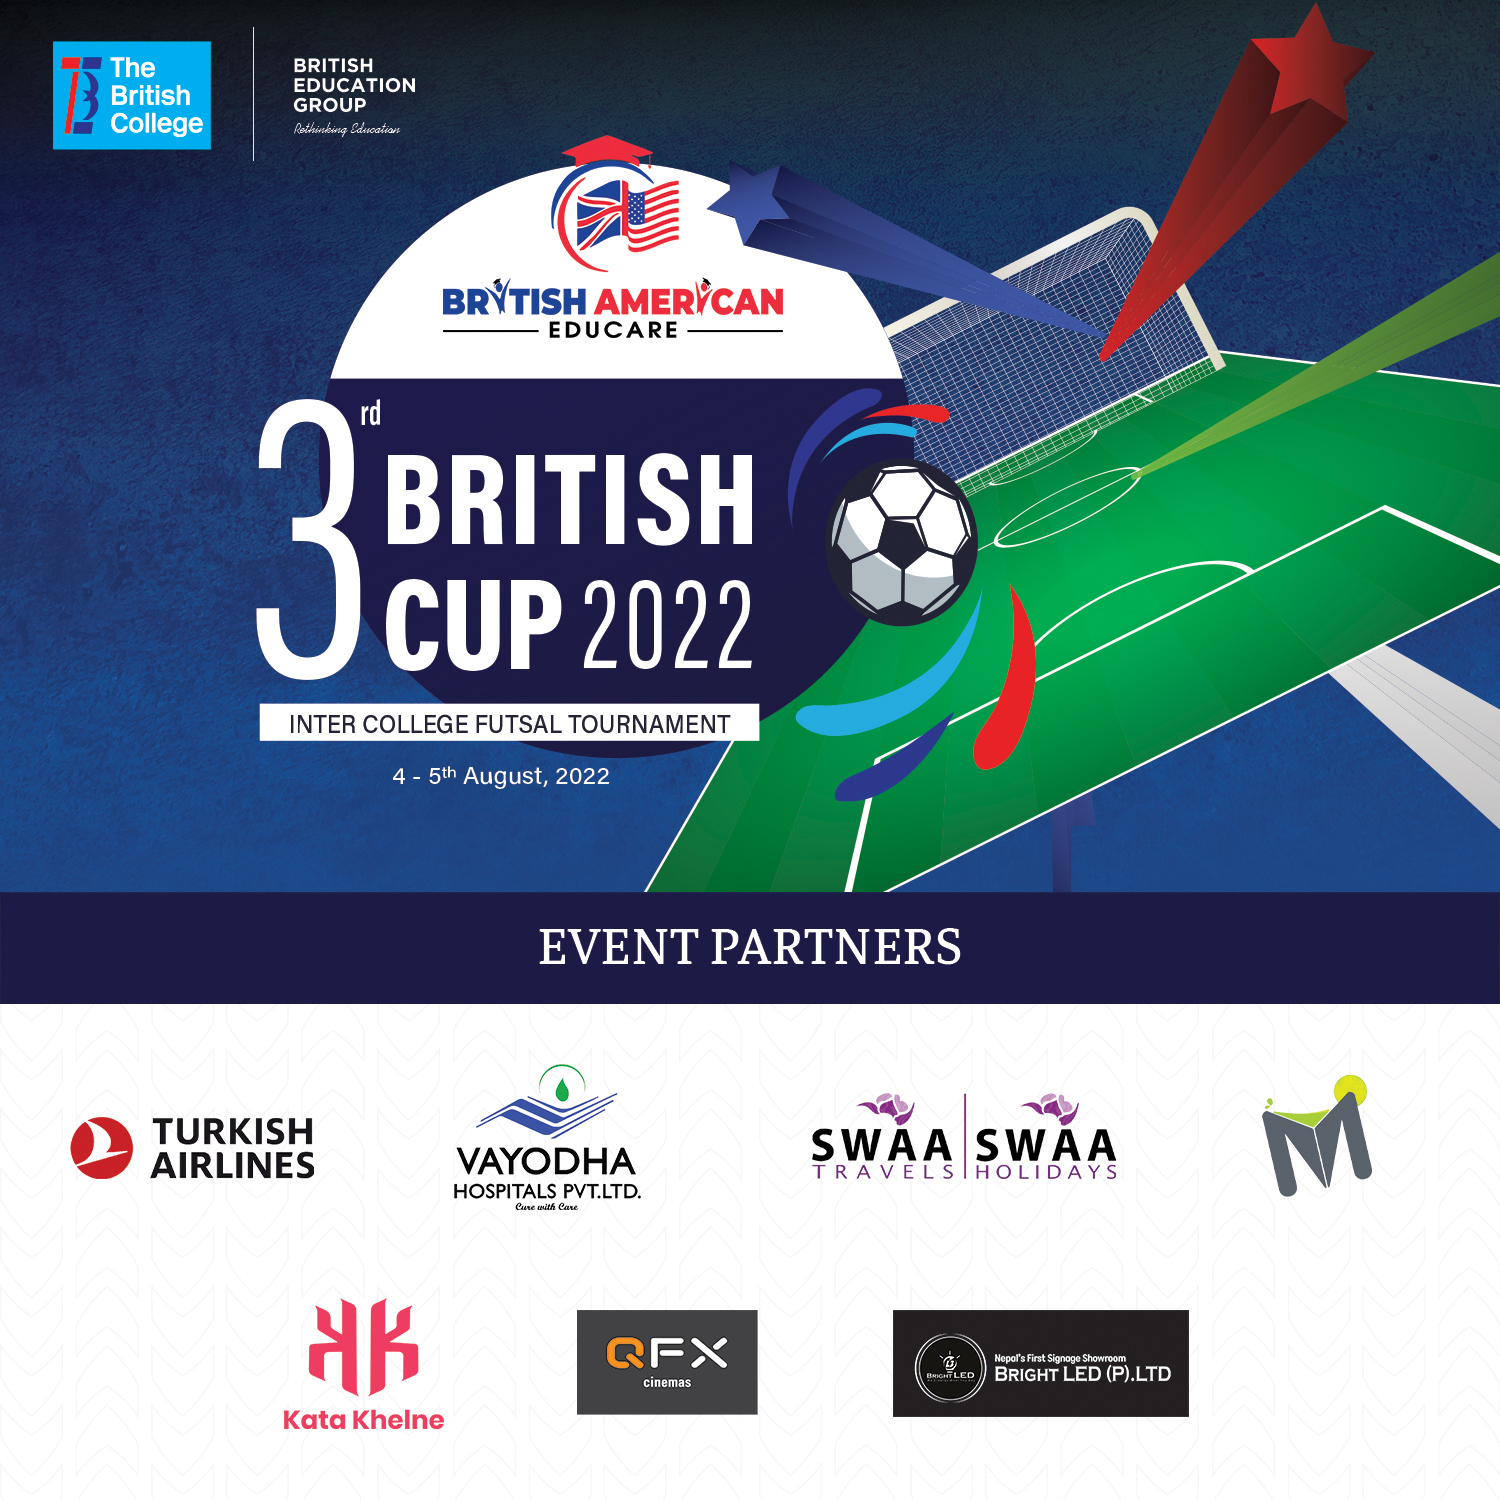 The Third British Cup 2022 